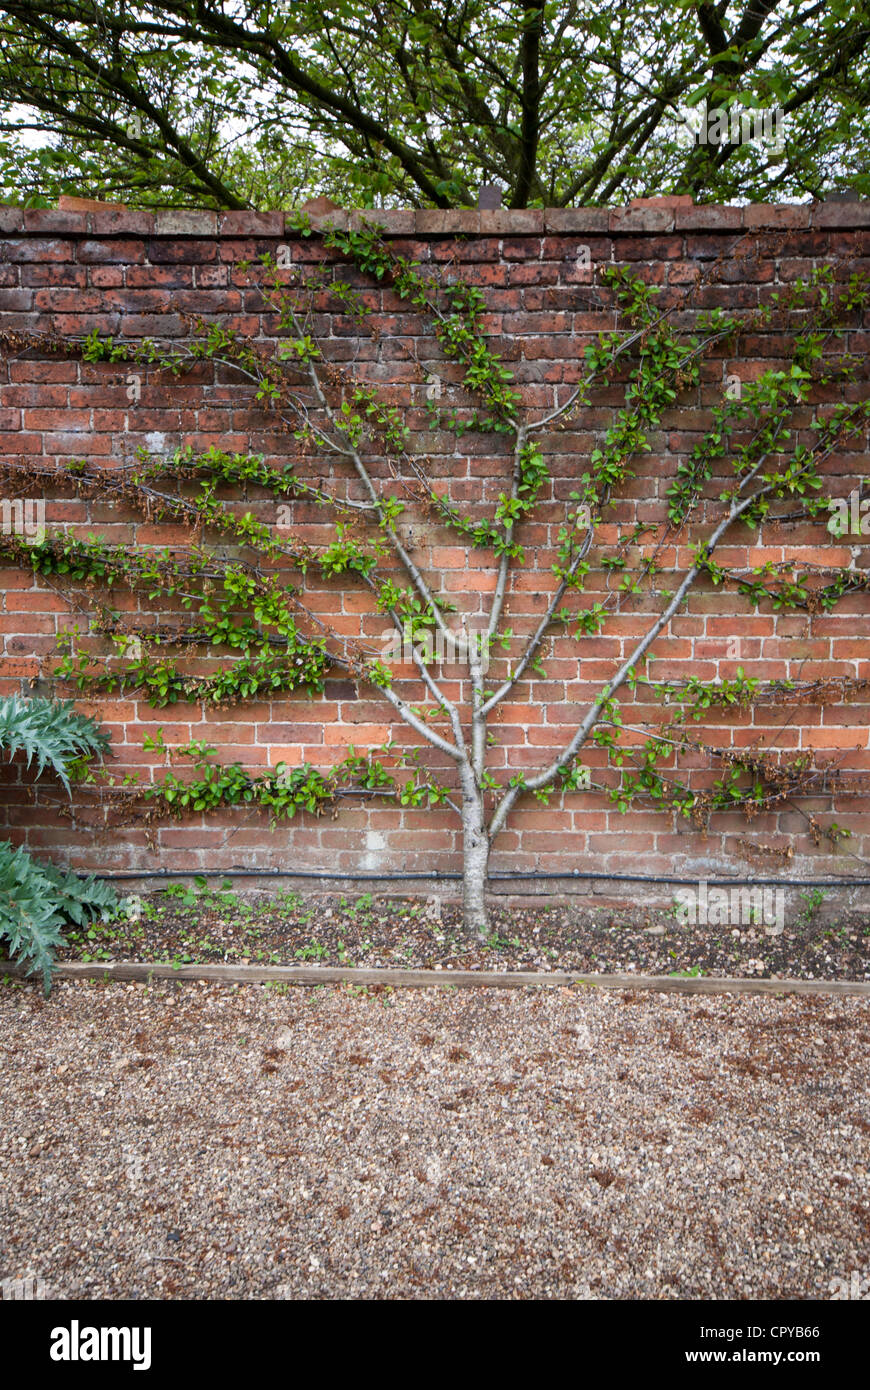 Fan trained cherry tree growing against a garden wall Stock Photo - Alamy